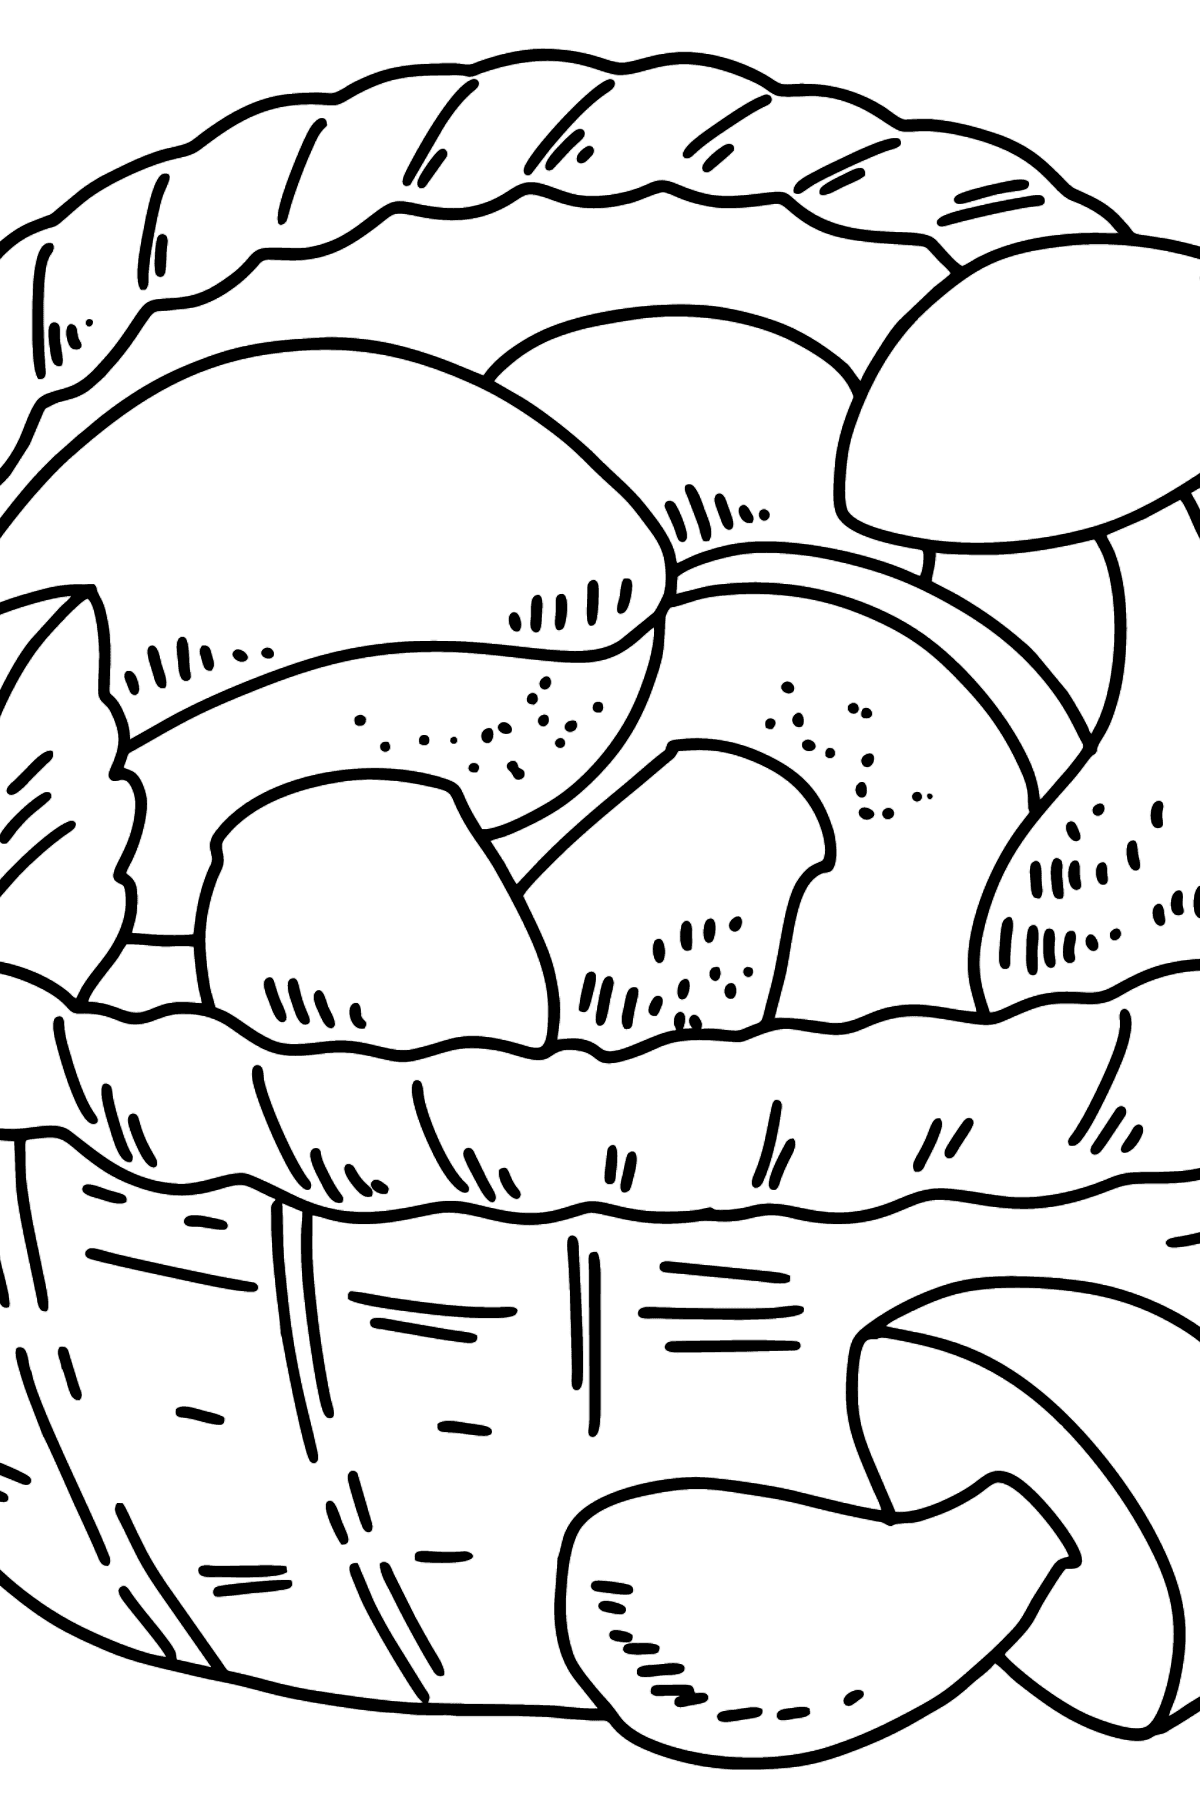 Porcini Mushrooms in a basket coloring page - Coloring Pages for Kids